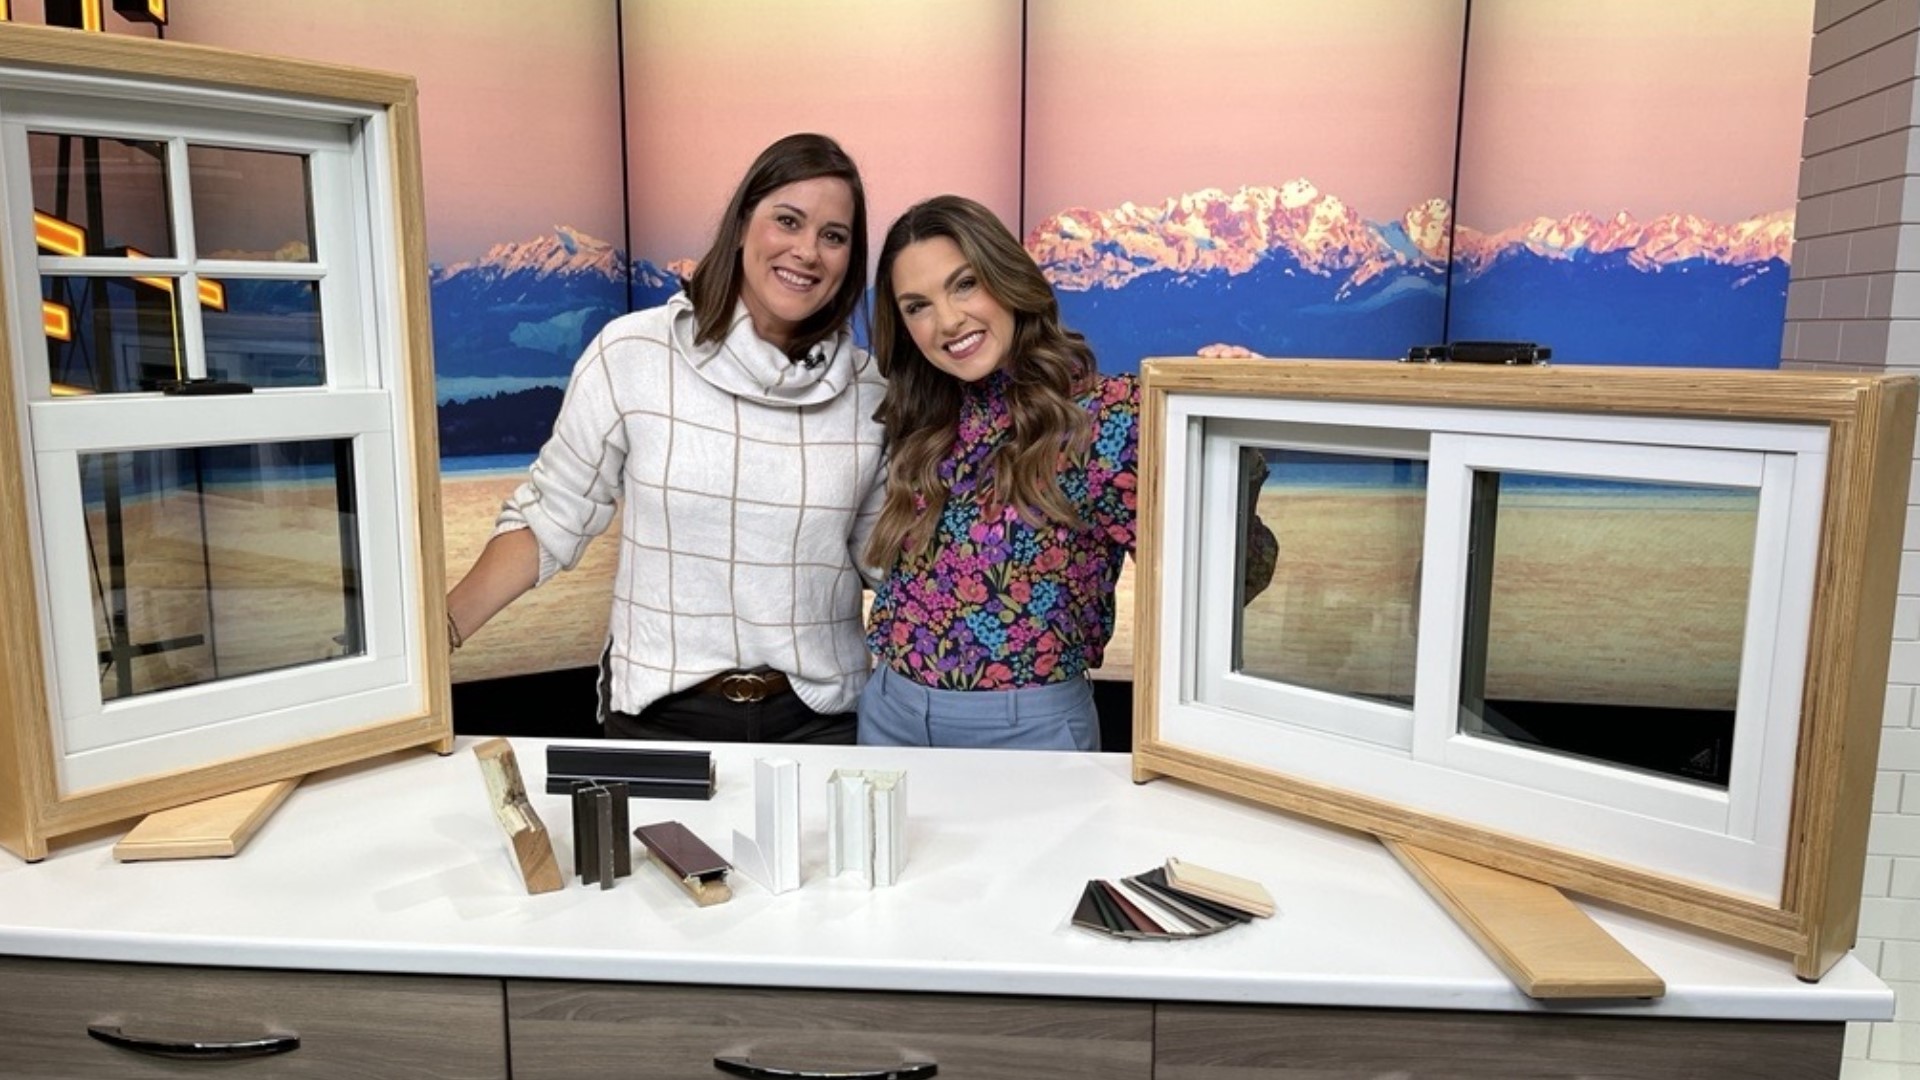 Designer Alyssa Jung of Renewal by Andersen talks design options for the windows in your home. Sponsored by Renewal by Andersen.